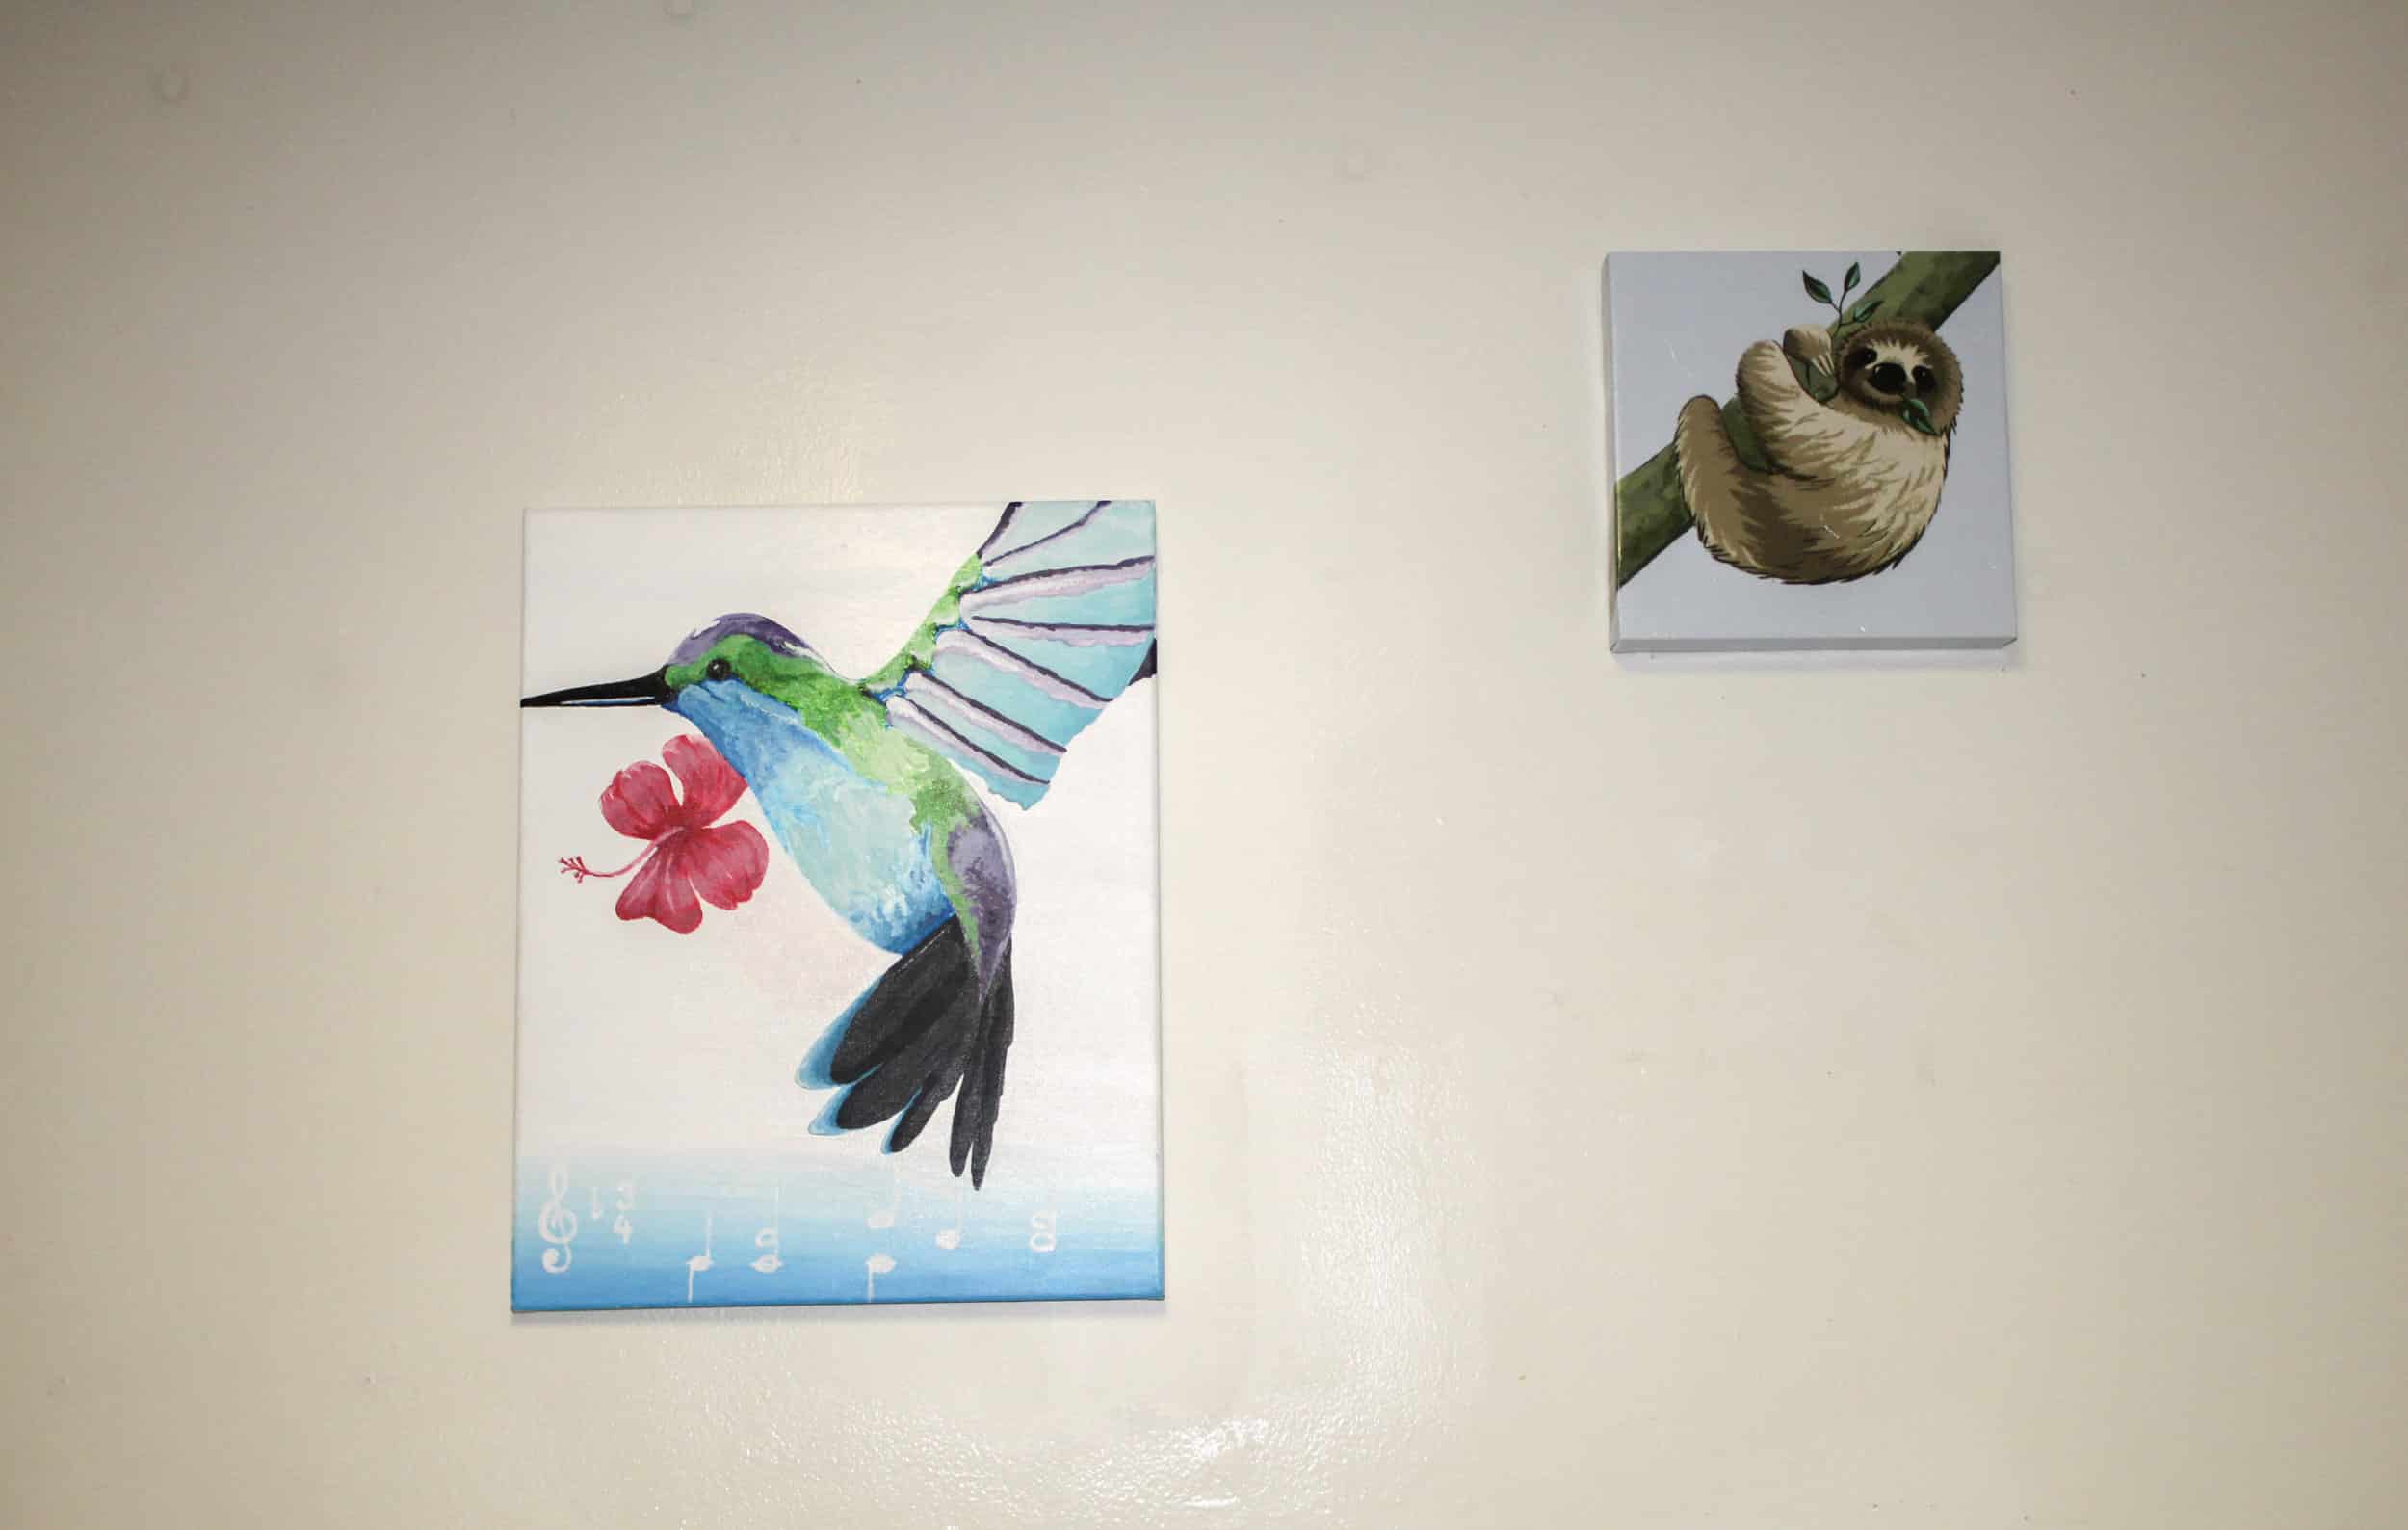 Gibson also displays pictures of different animals in her room. The painting of the sloth was painted by her friend.